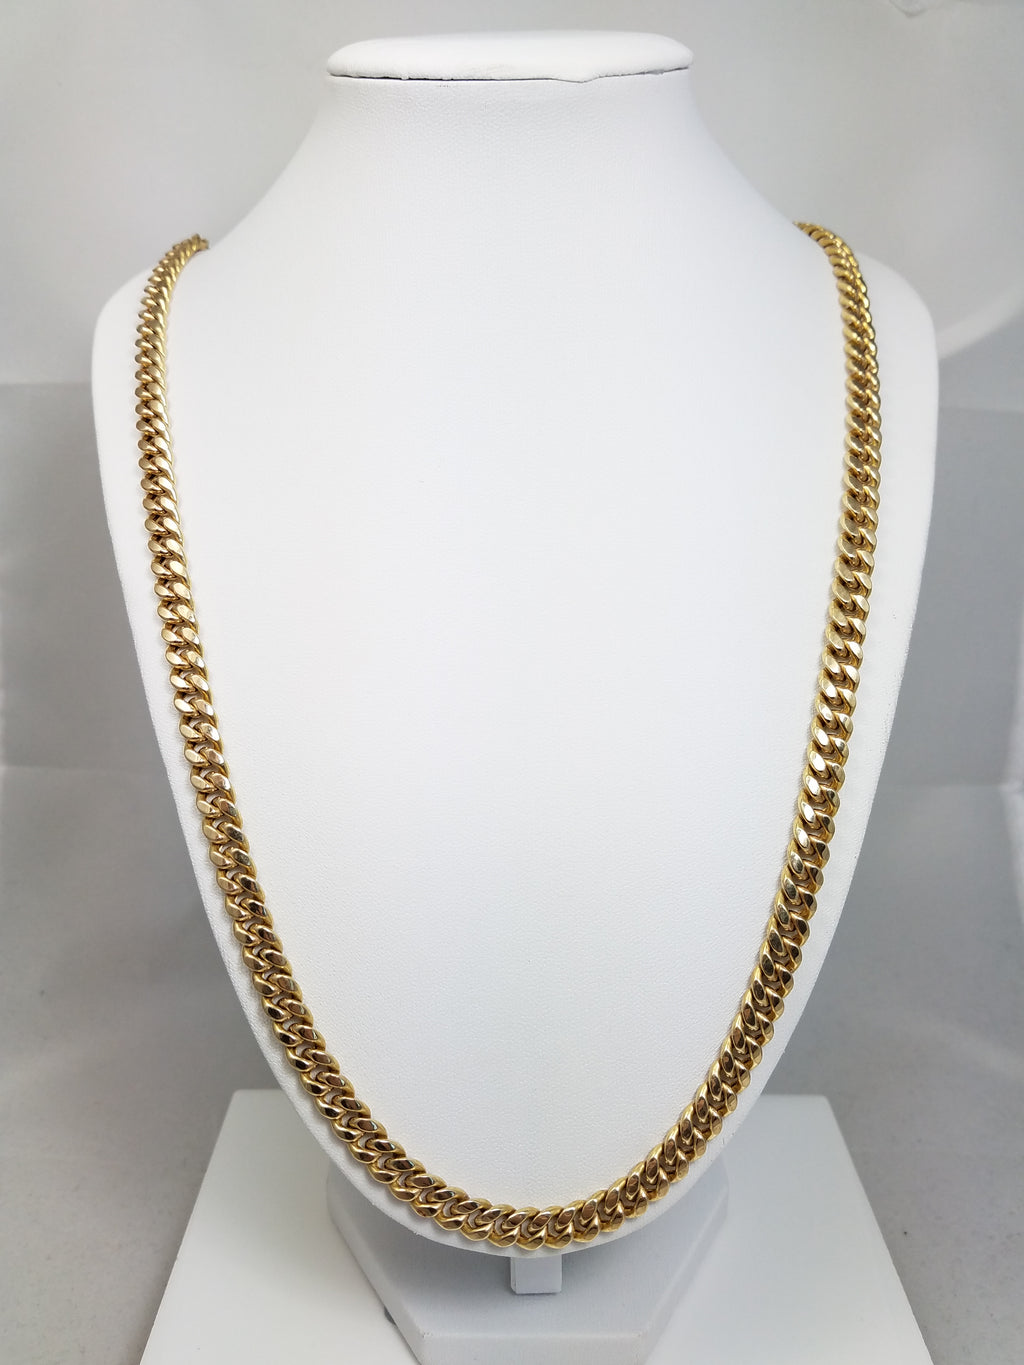 Cool 28" Hollow 10k Yellow Gold Cuban Link Chain Necklace